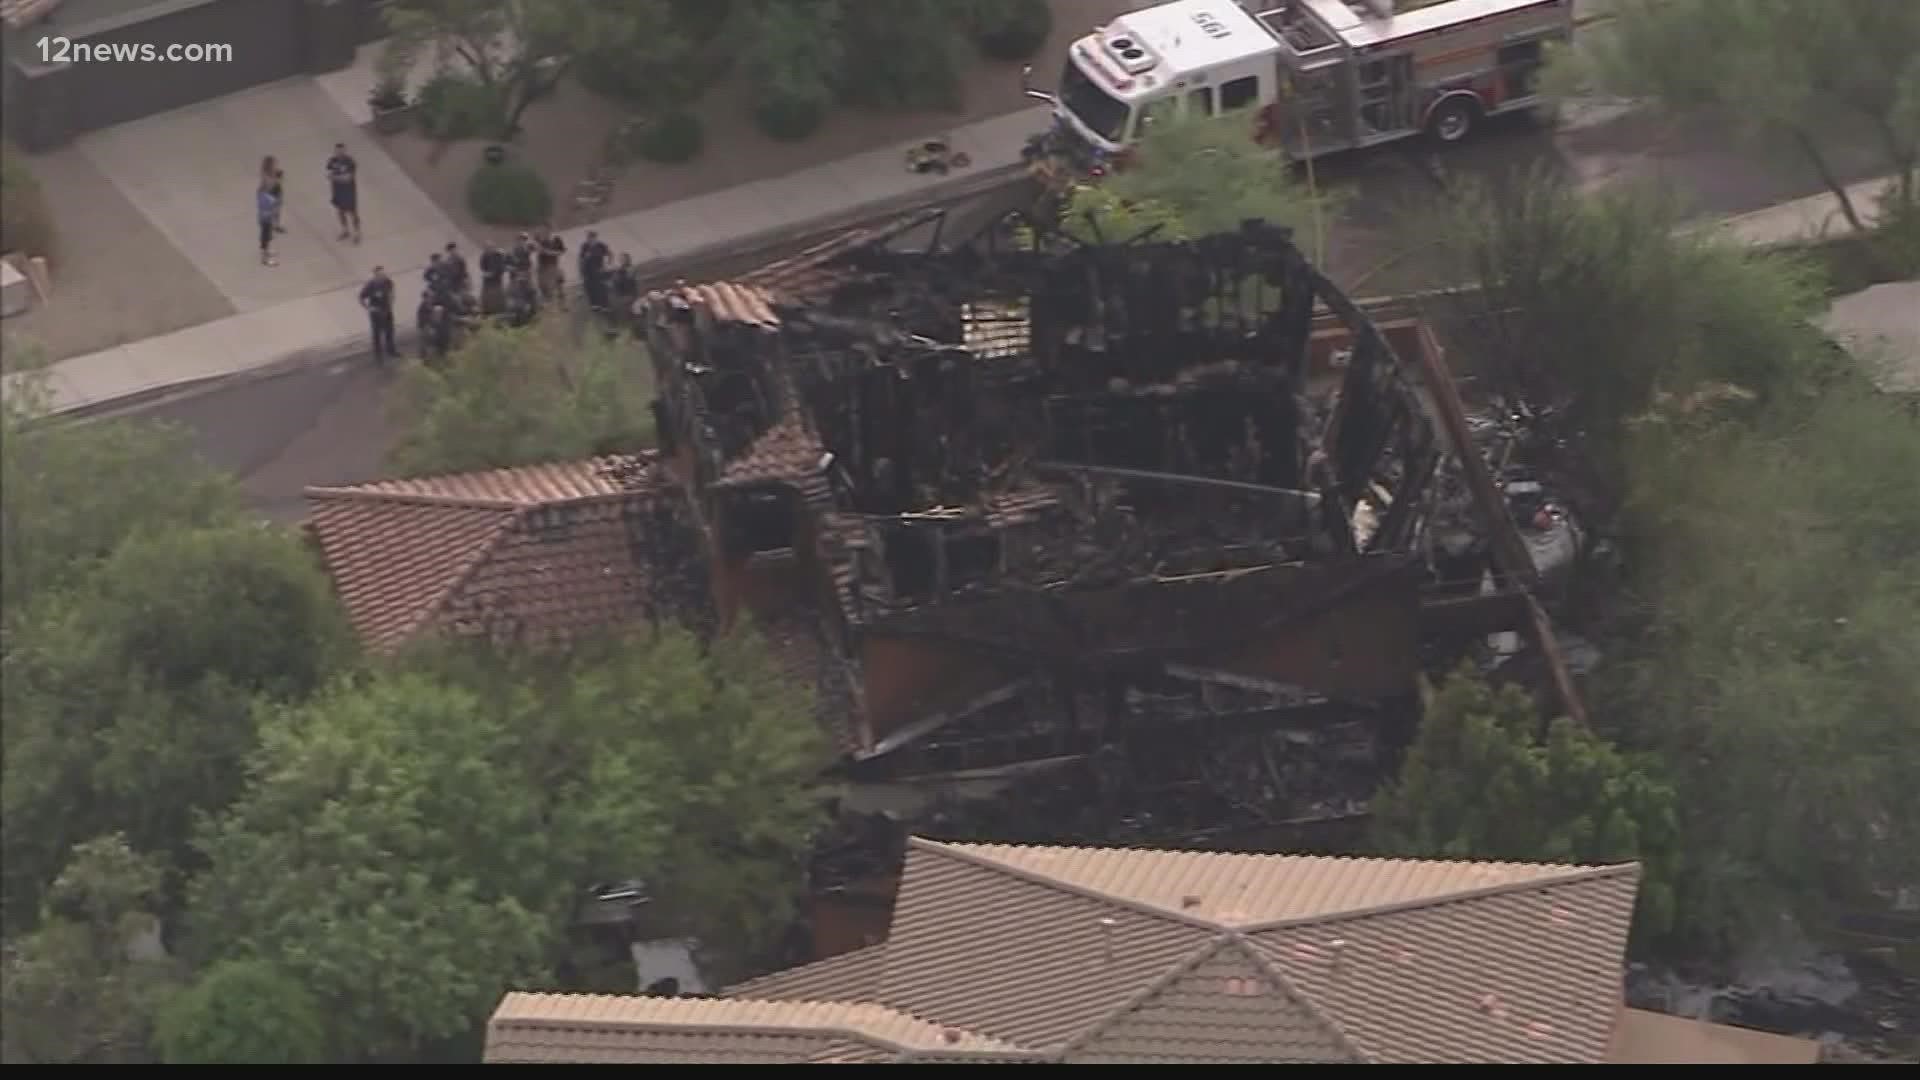 A Peoria police officer is being hailed as a hero after helping a homeowner escape a house fire early Friday morning.